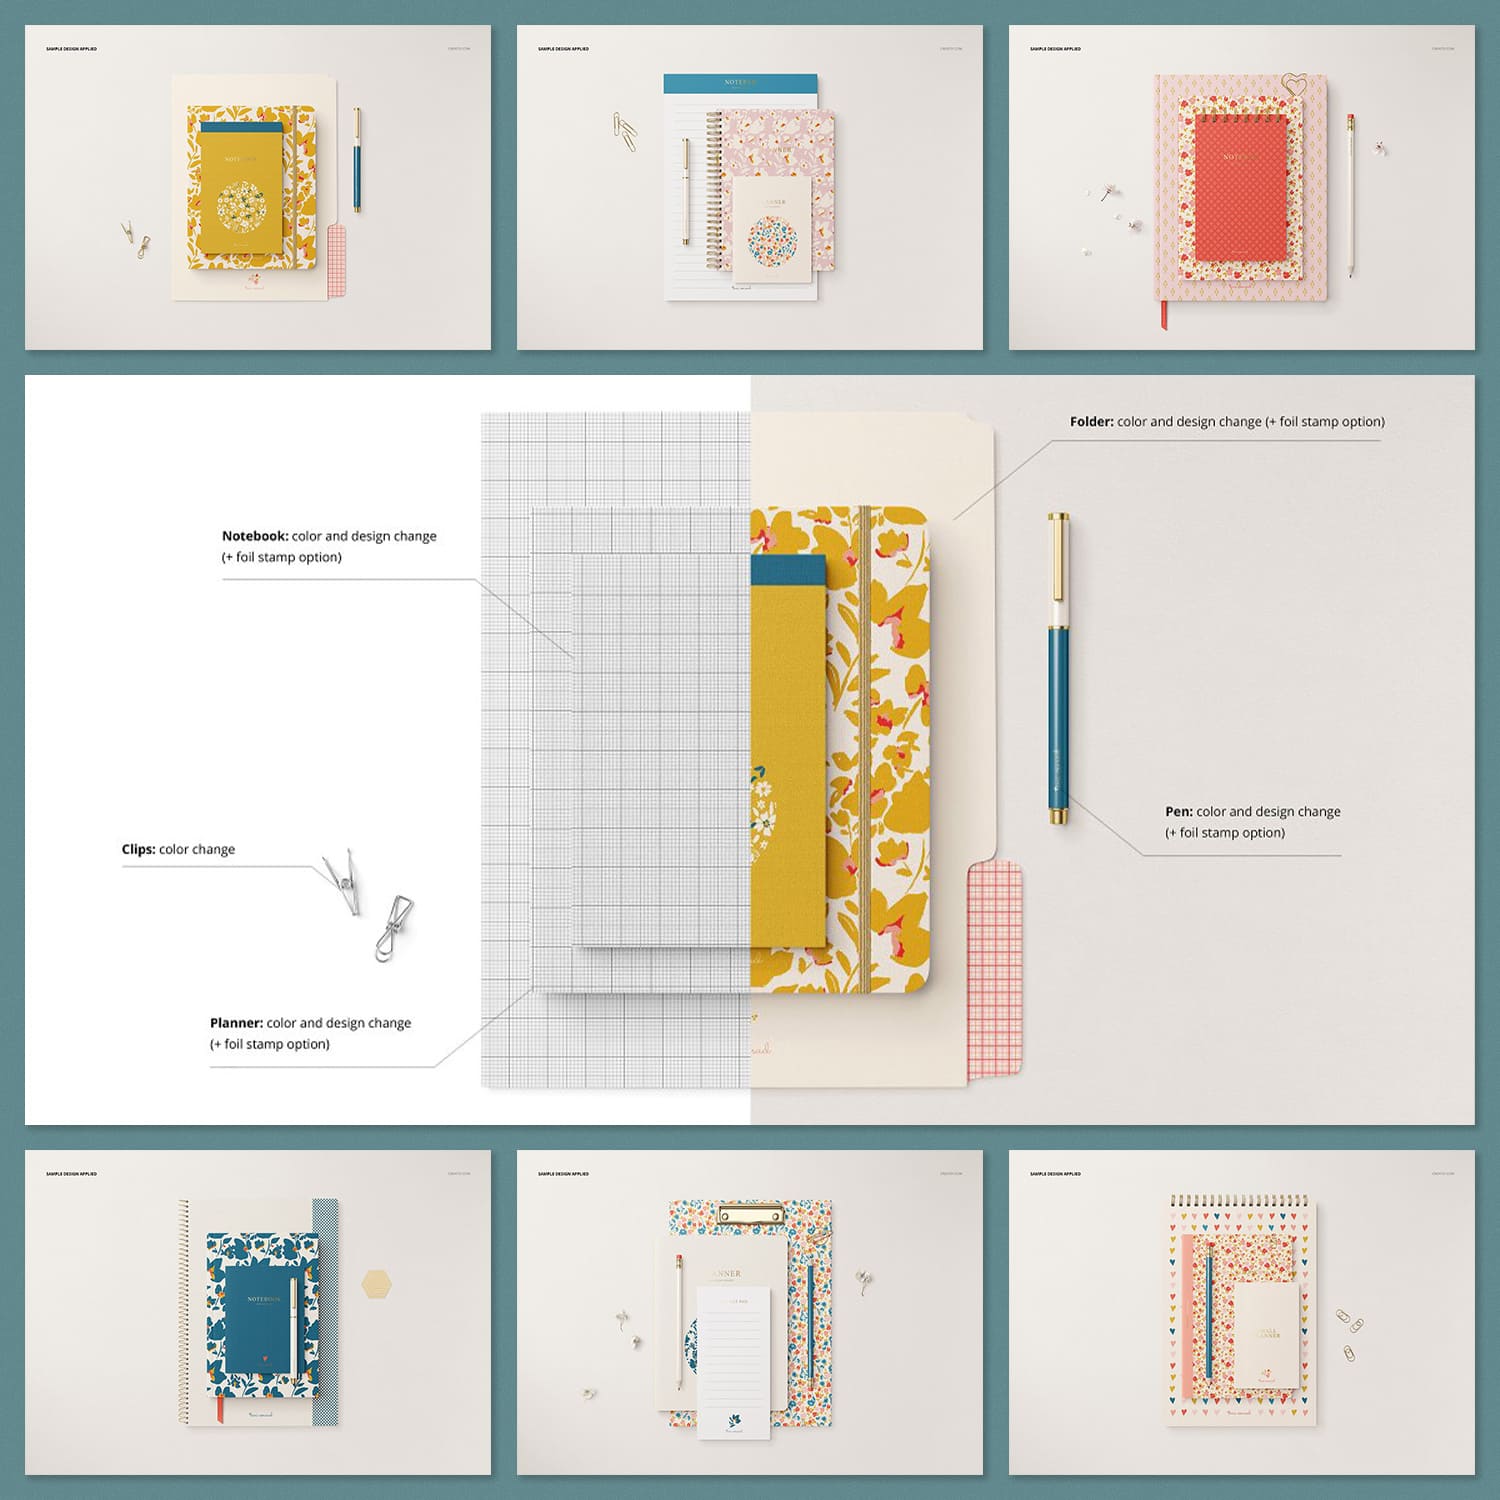 A set of stationery images with great designs.